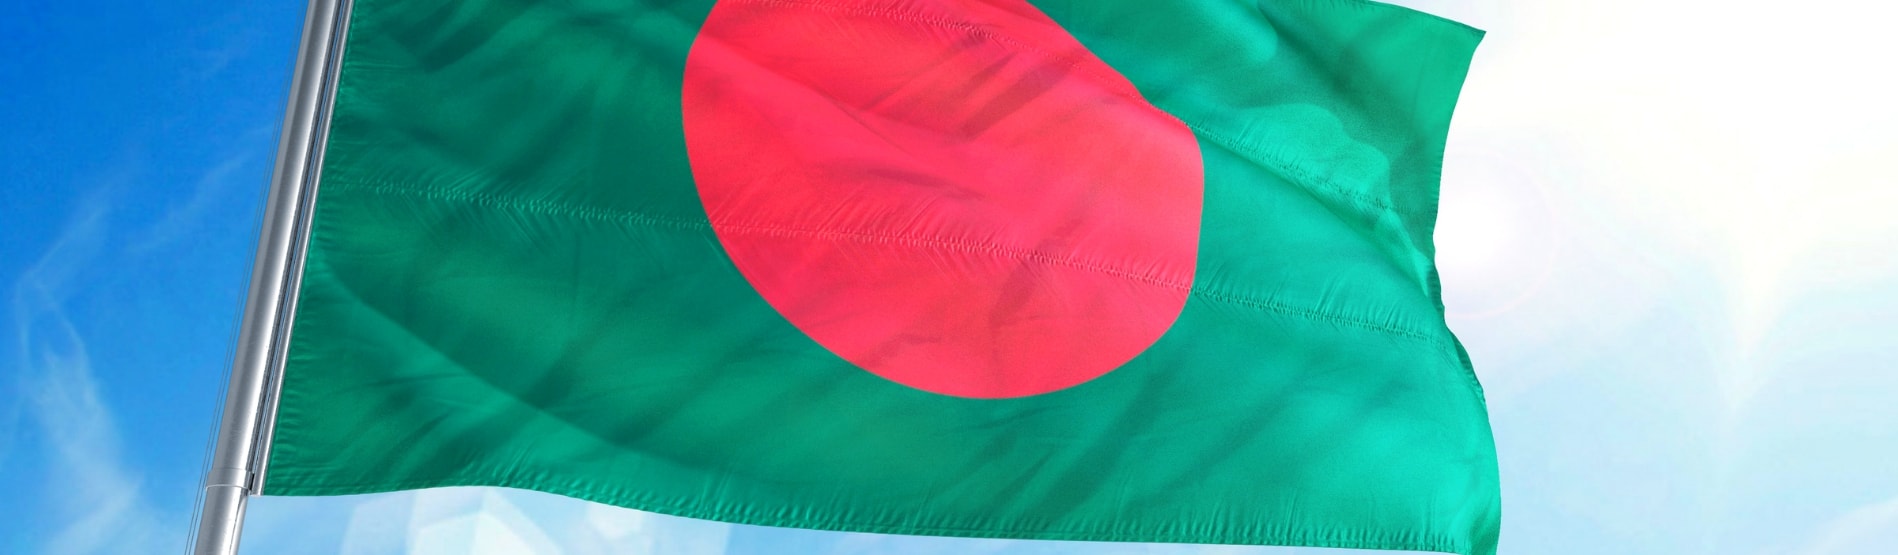 The flag of Bangladesh waving in the breeze.